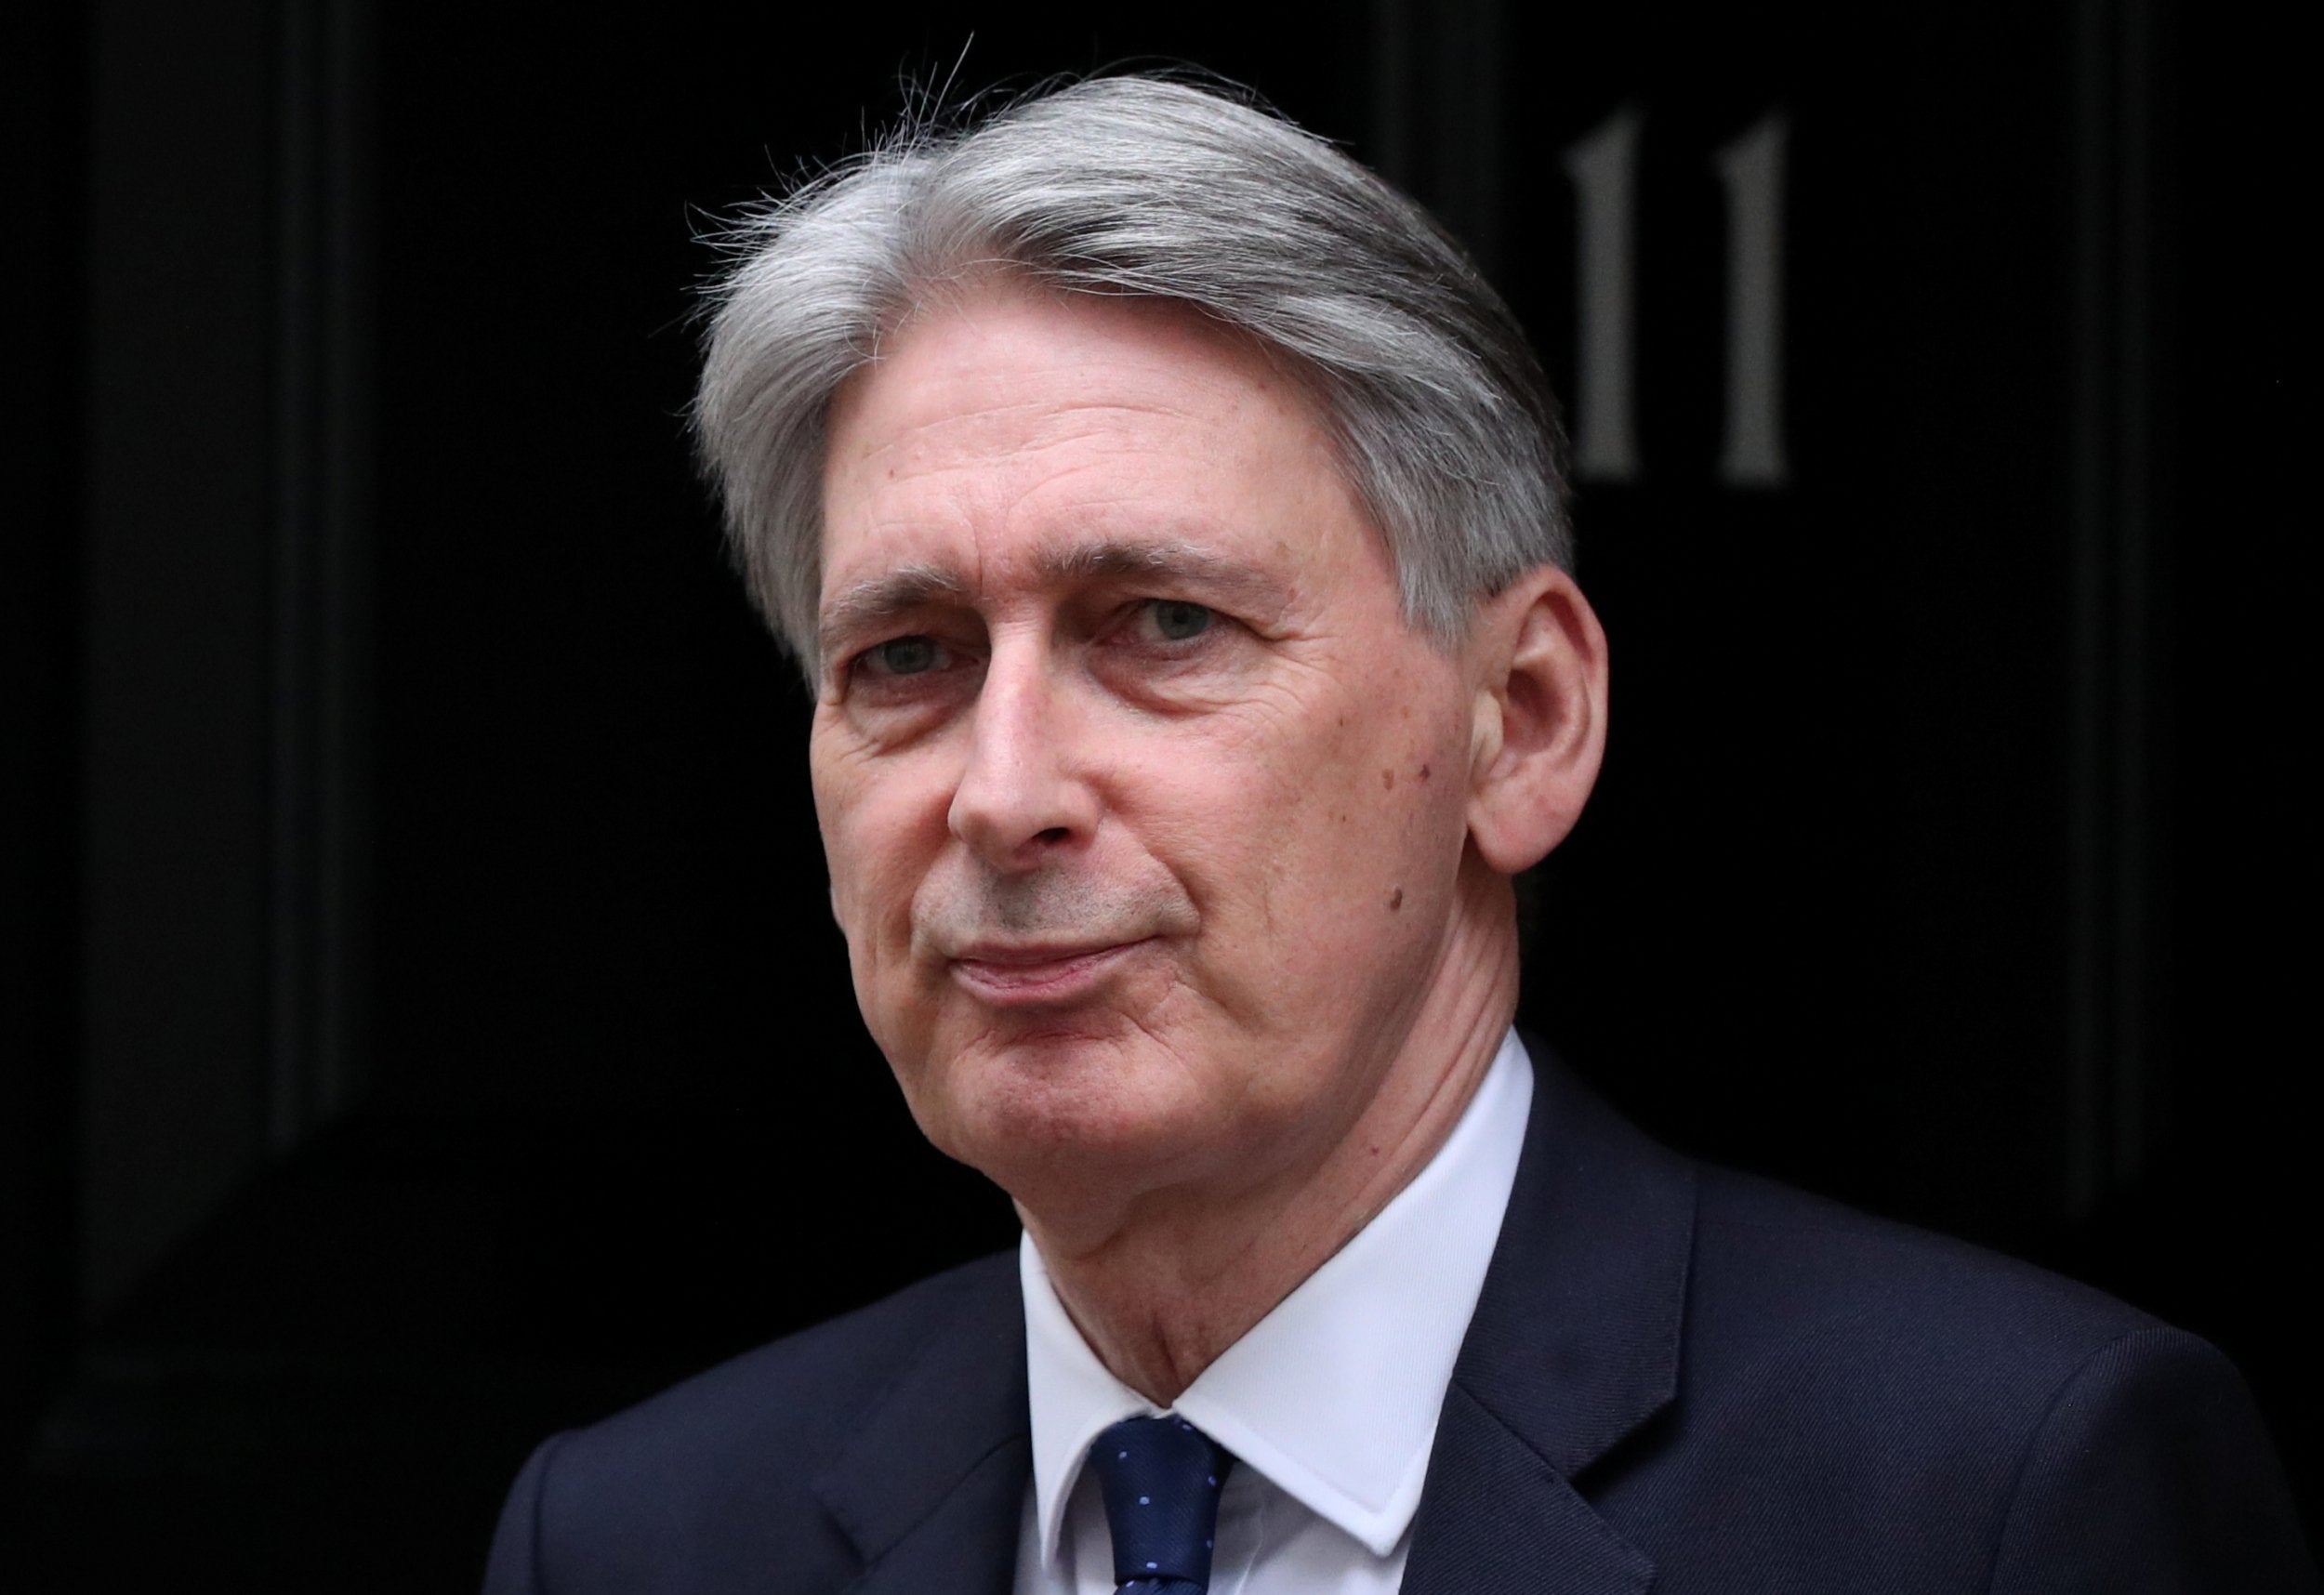 Chancellor Philip Hammond has started the search for the new governor of the Bank of England